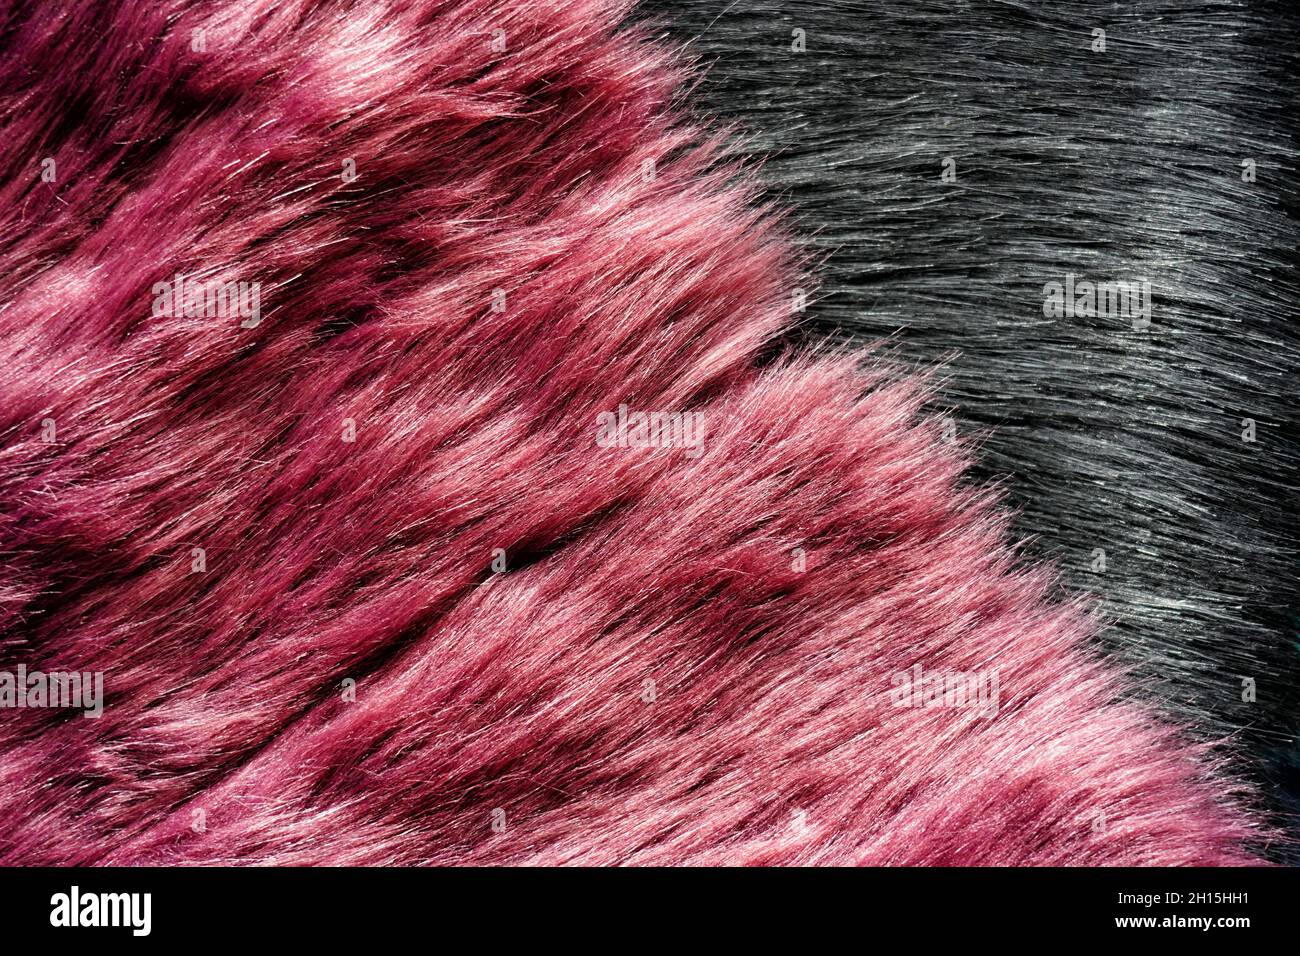 Soft two-colour pink and black fashion furs. Stock Photo